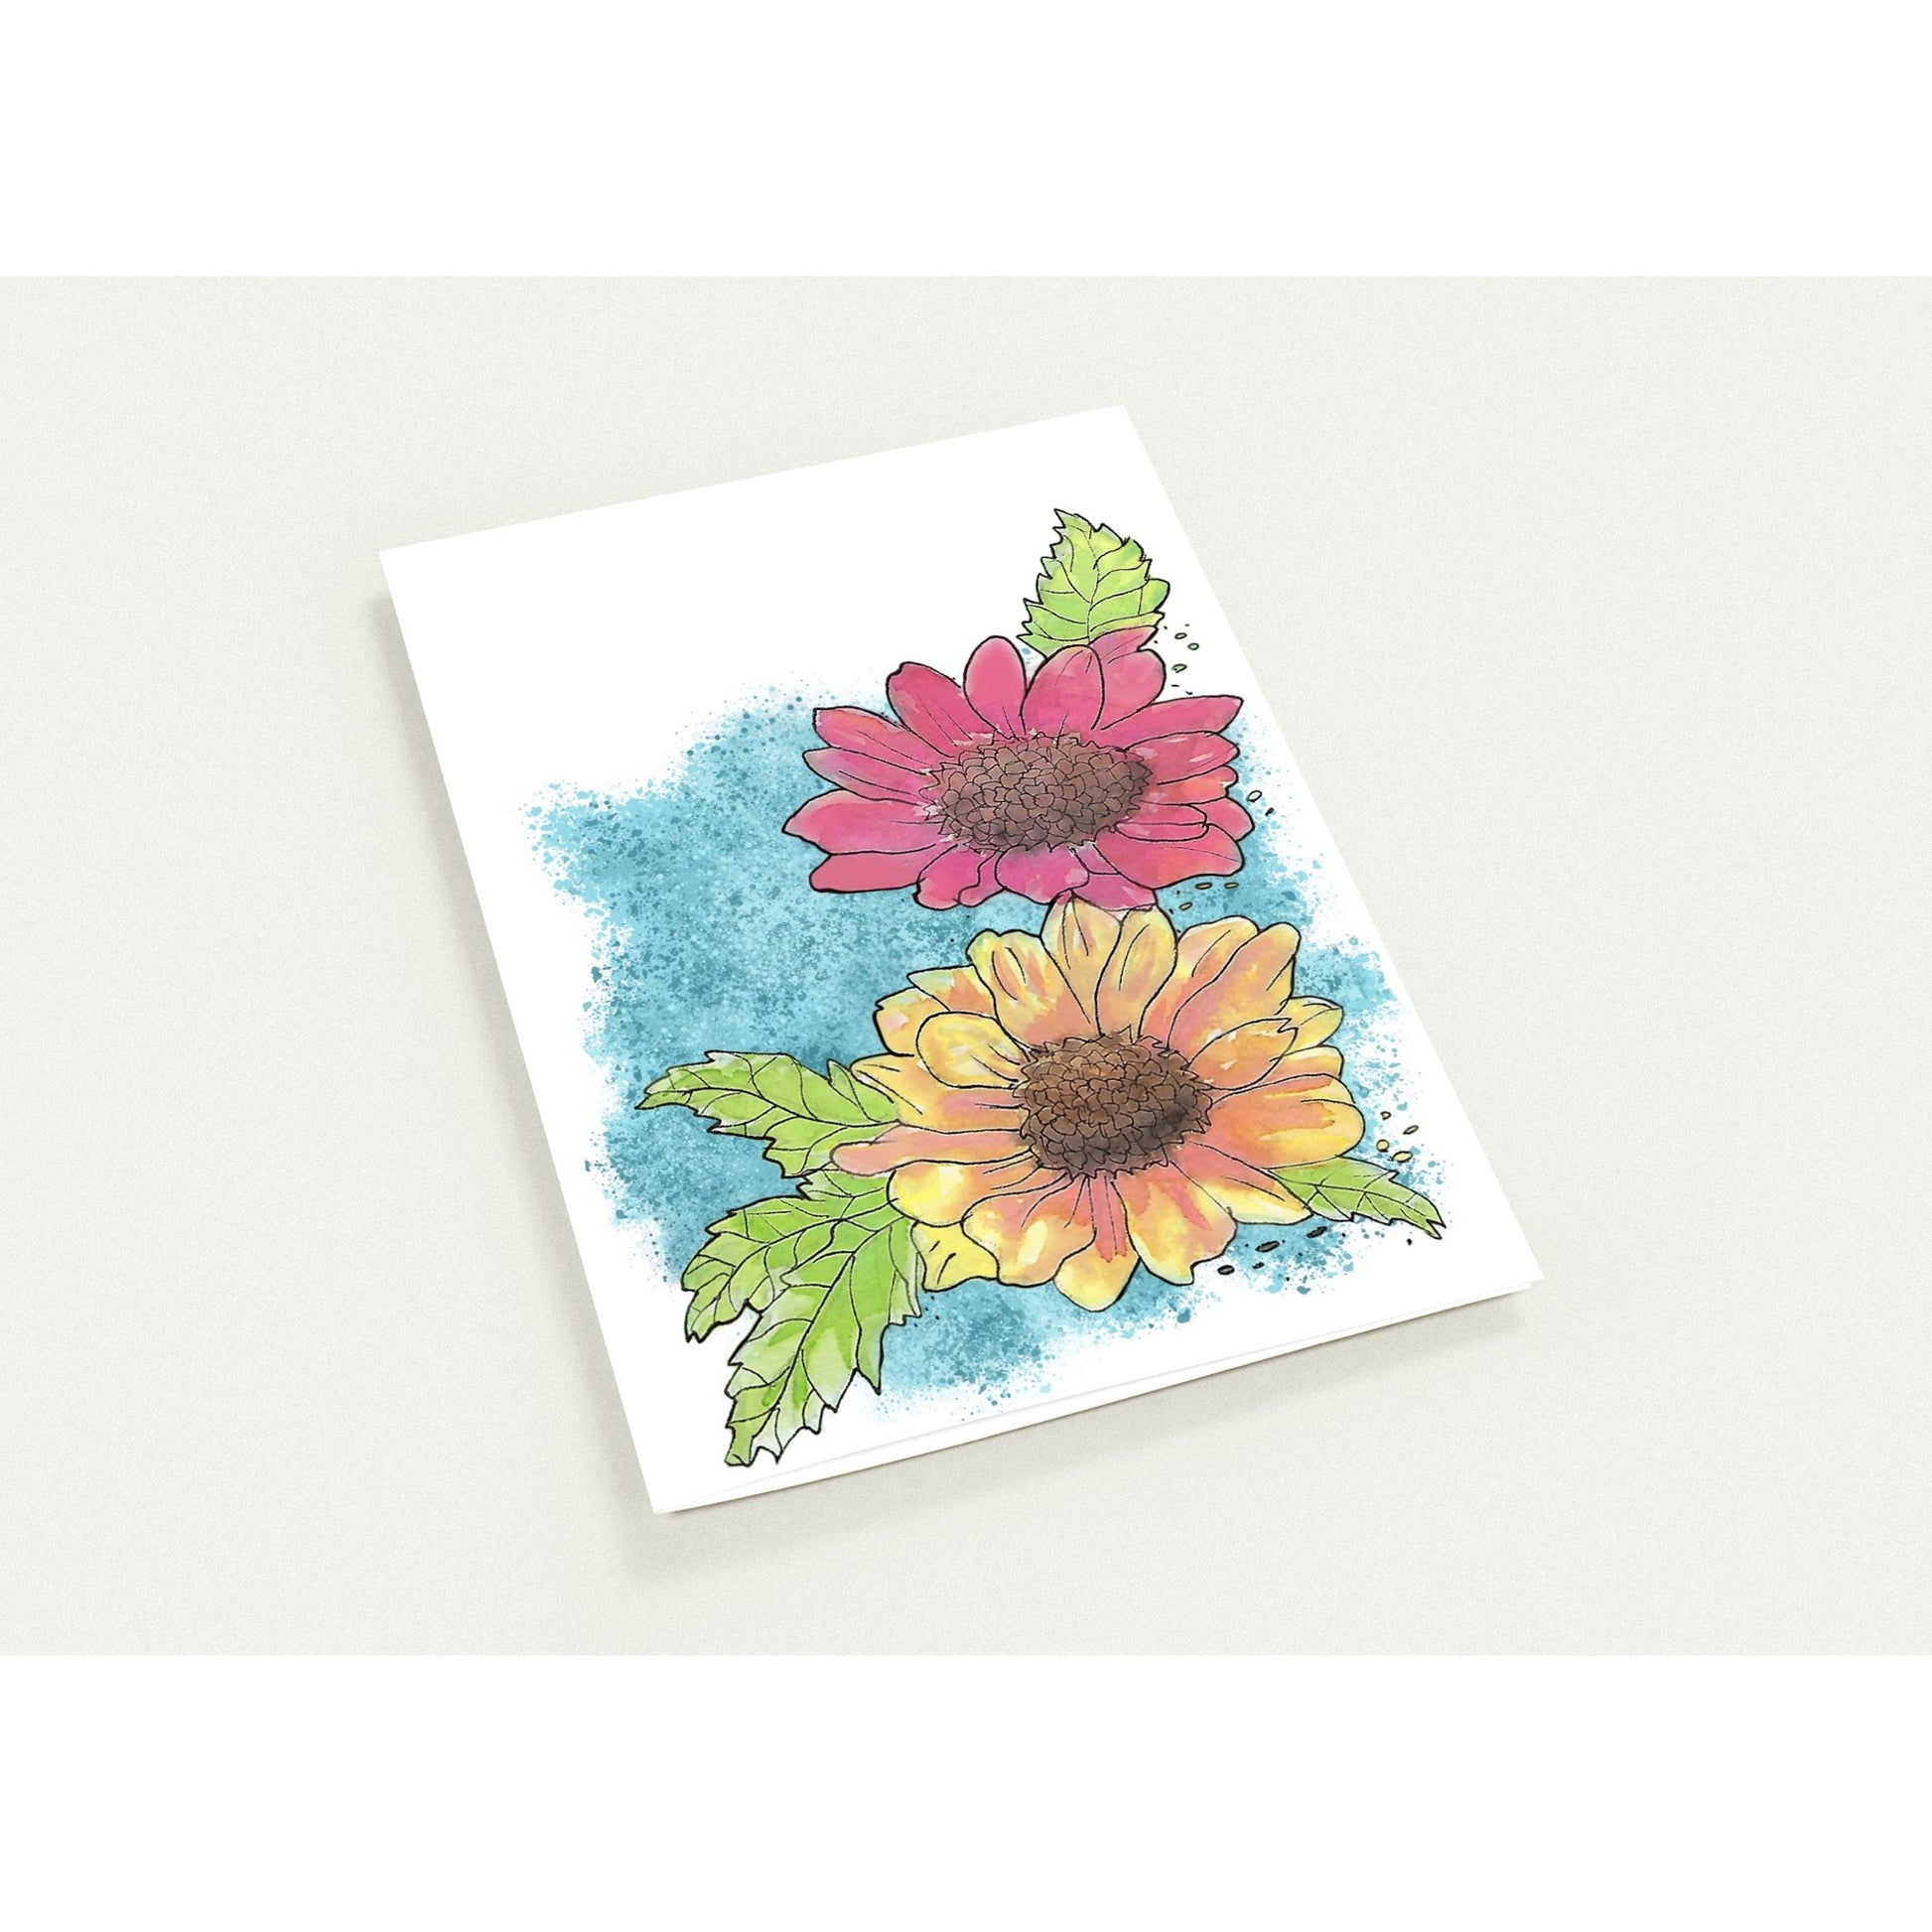 5.5 by 8.5 inch Gerber daisies set of 10 greeting cards and 10 envelopes. Printed on glossy paperboard. Front has a print of watercolor Gerber daisies on a blue accent. Inside has a blue watercolor border with daisy accents.